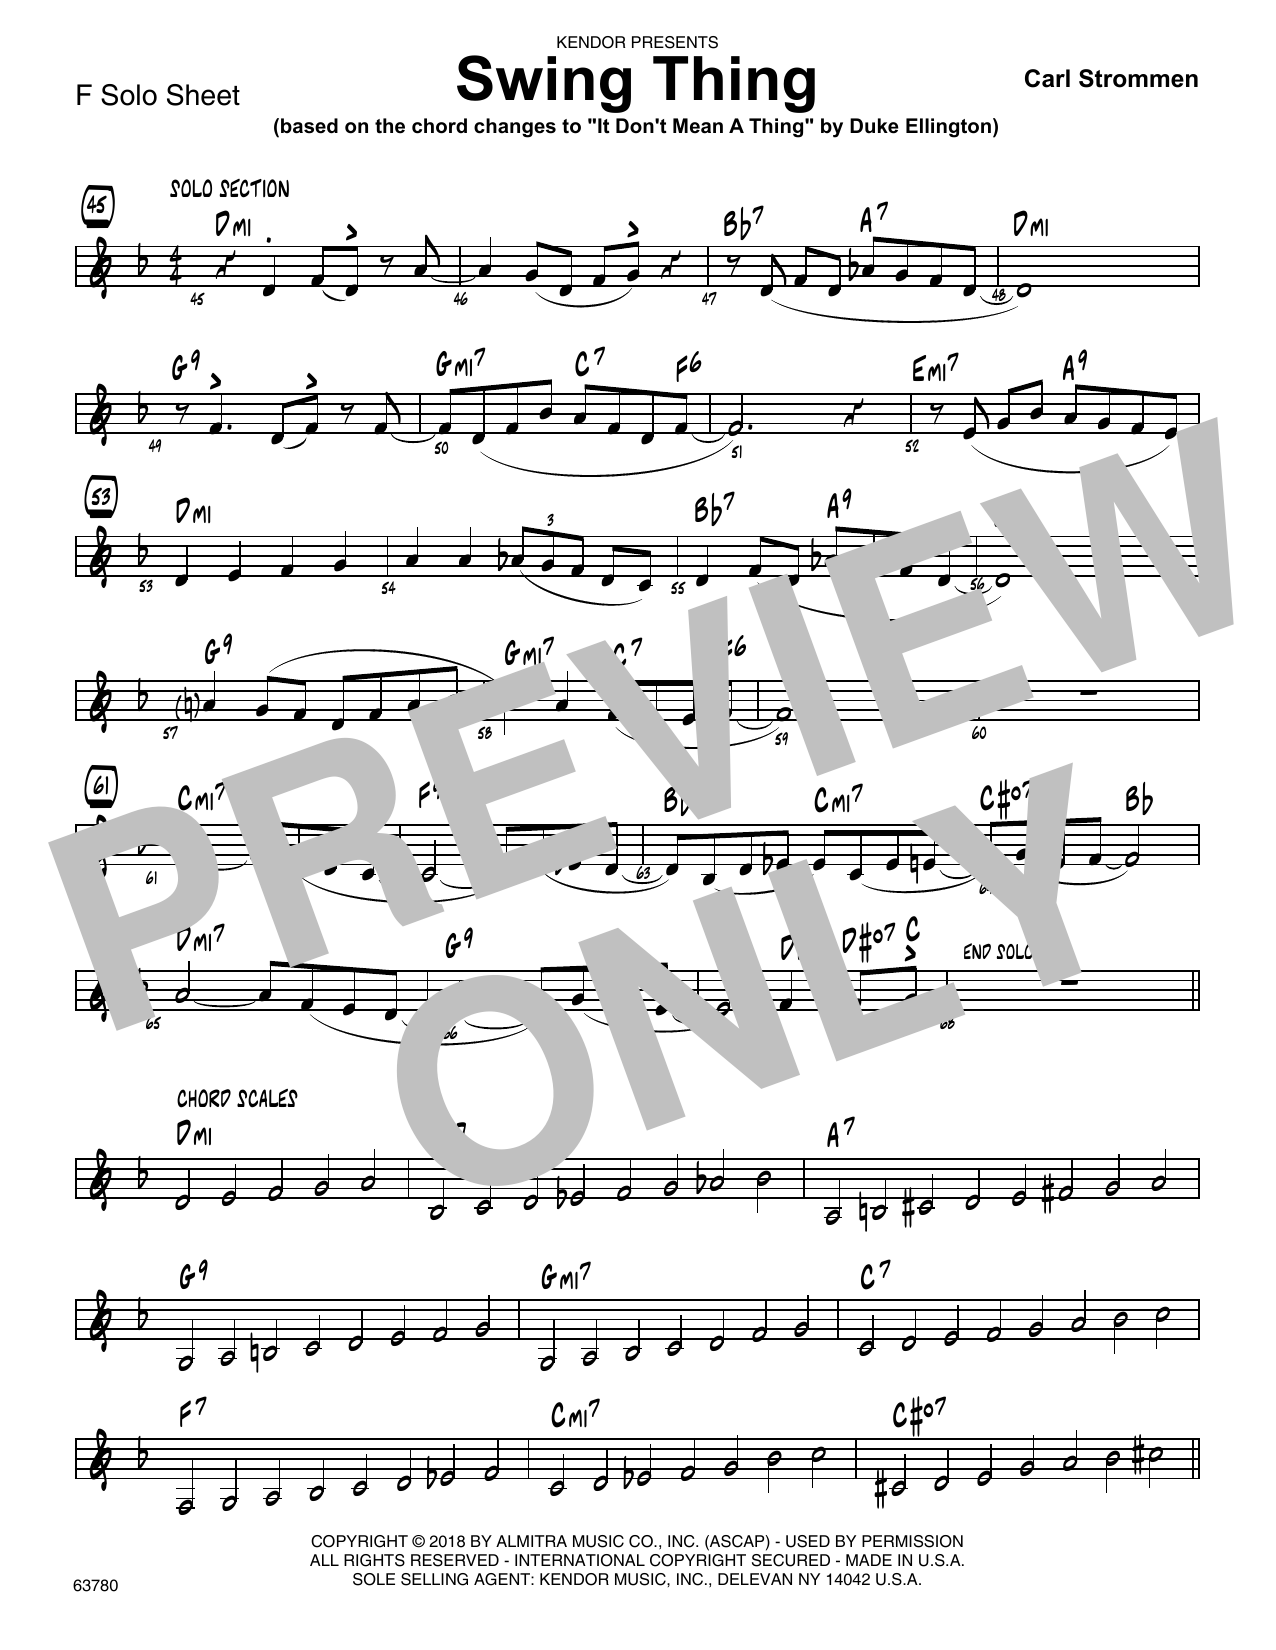 Download Carl Strommen Swing Thing - Solo Sheet for F Instrume Sheet Music